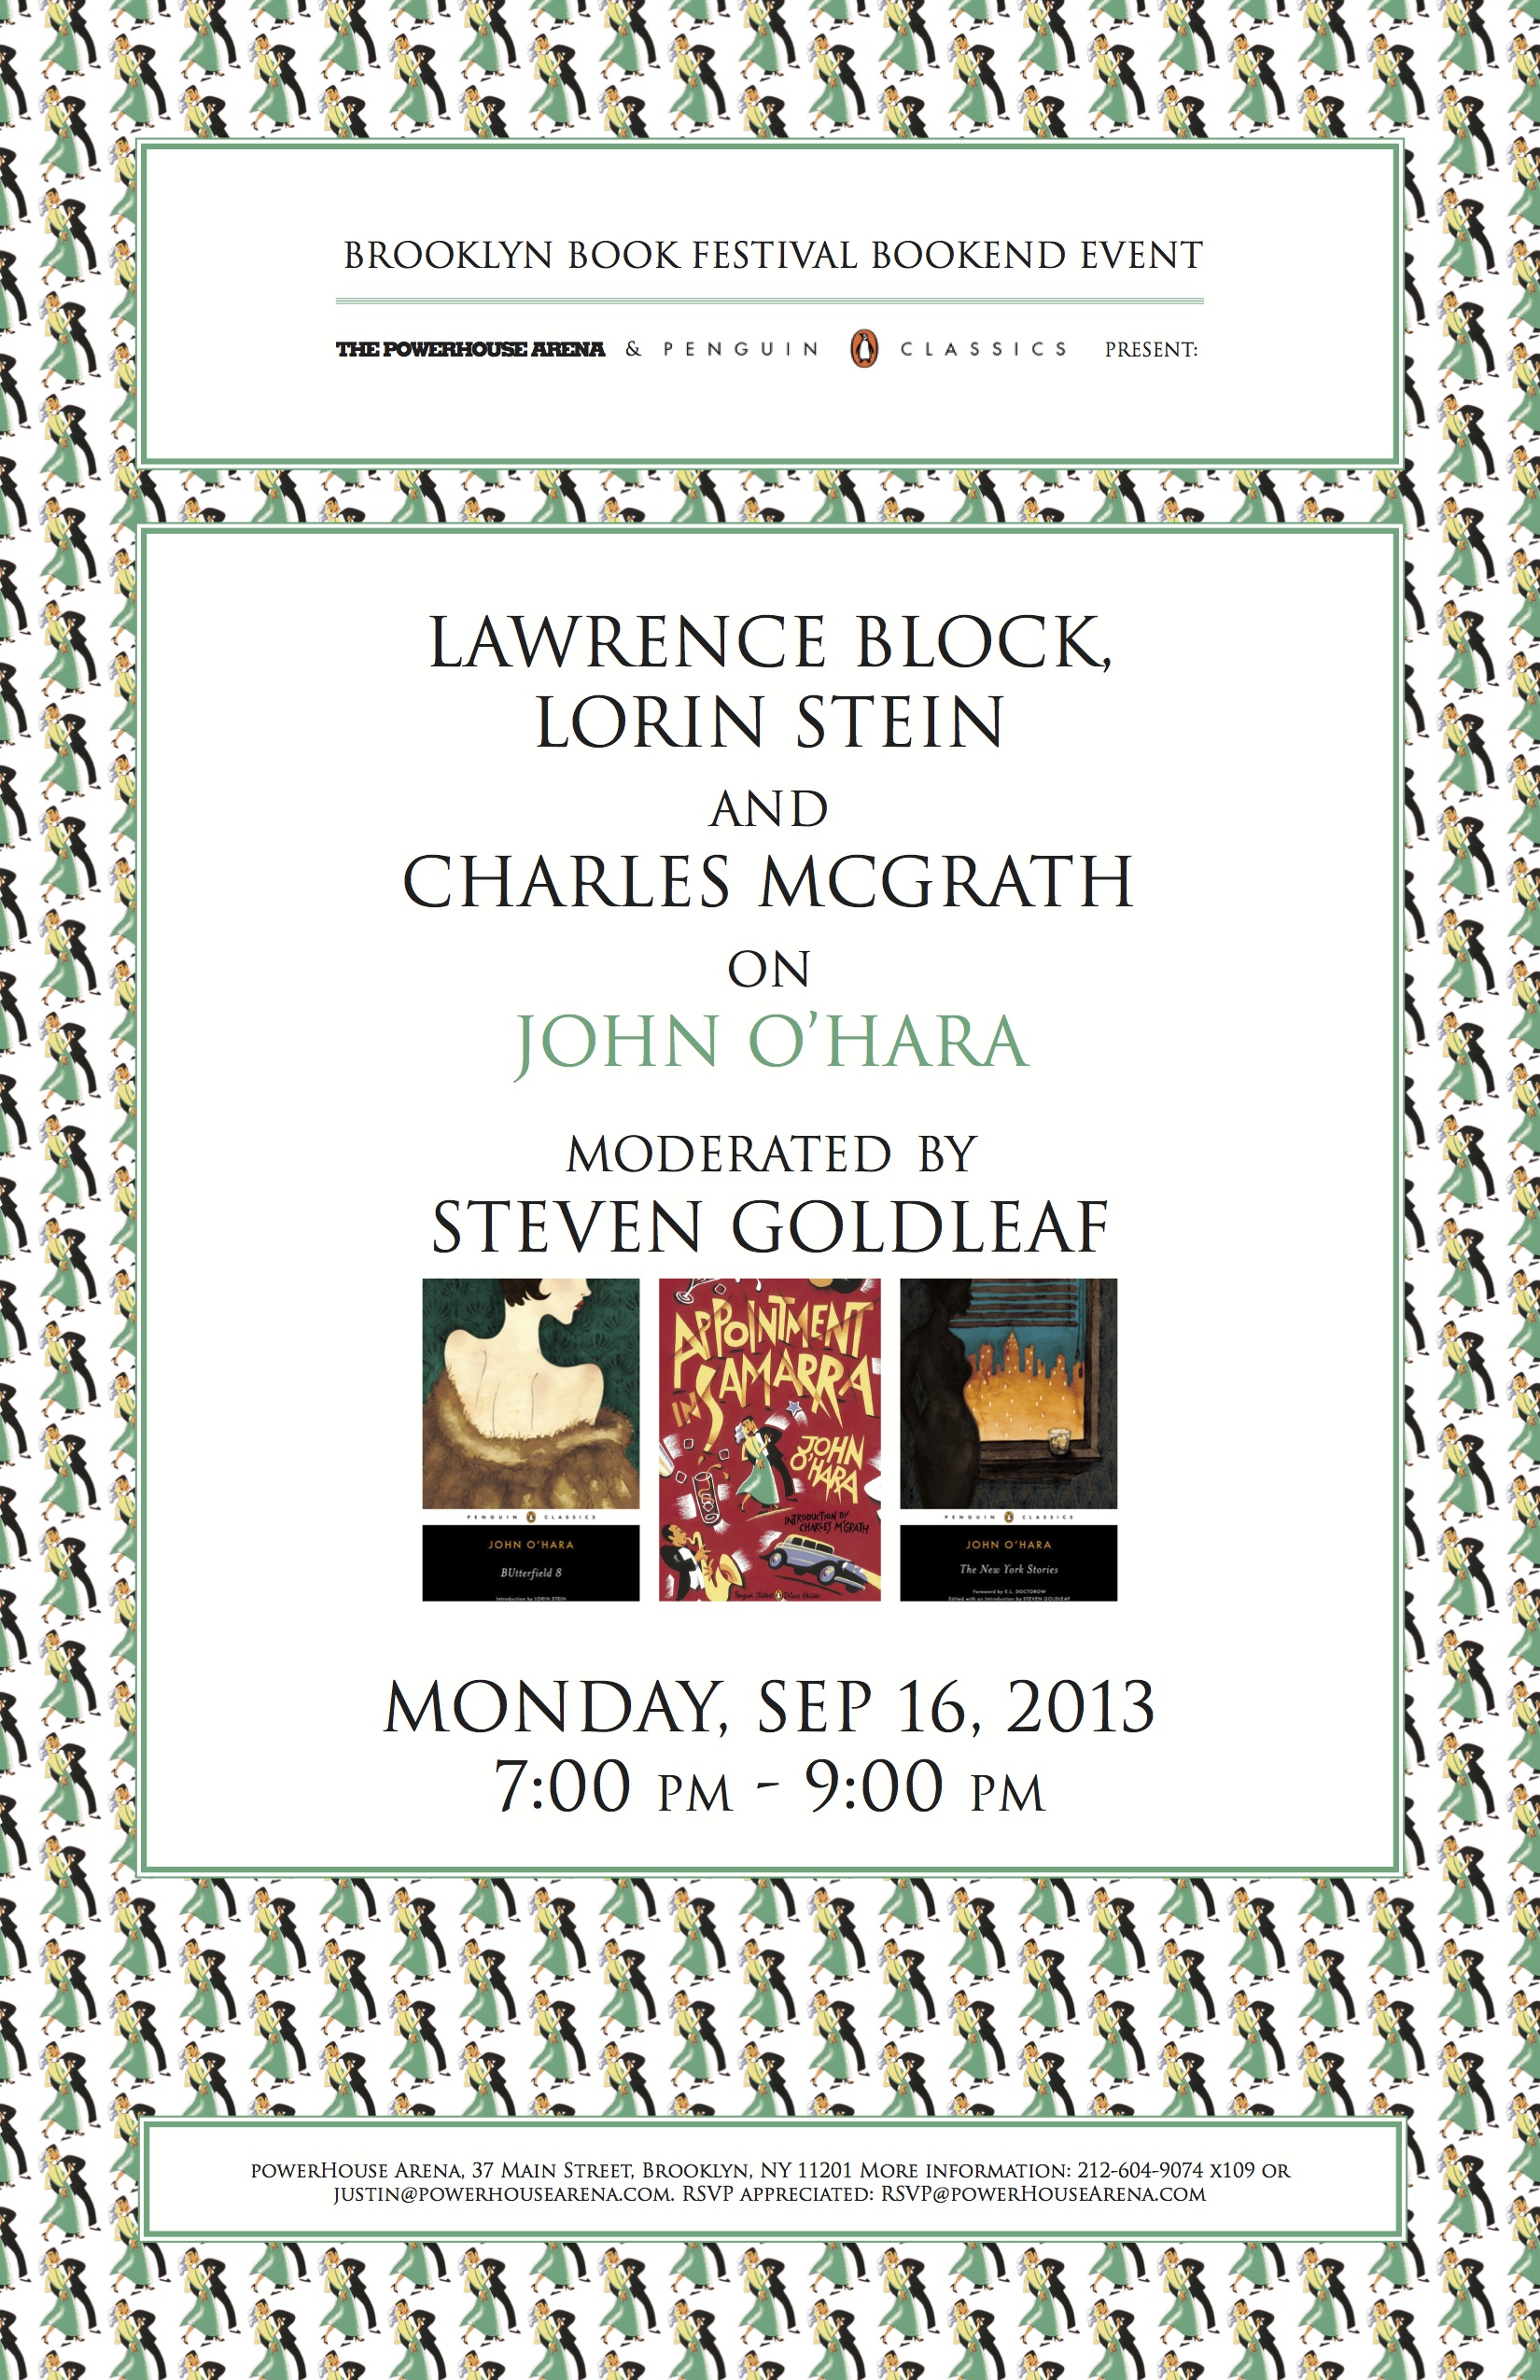  Brooklyn Book Festival Bookend Event: POWERHOUSE Arena + Penguin Classics Present: Lawrence Block, Lorin Stein and Charles McGrath on John O’Hara, moderated by Steven Goldleaf